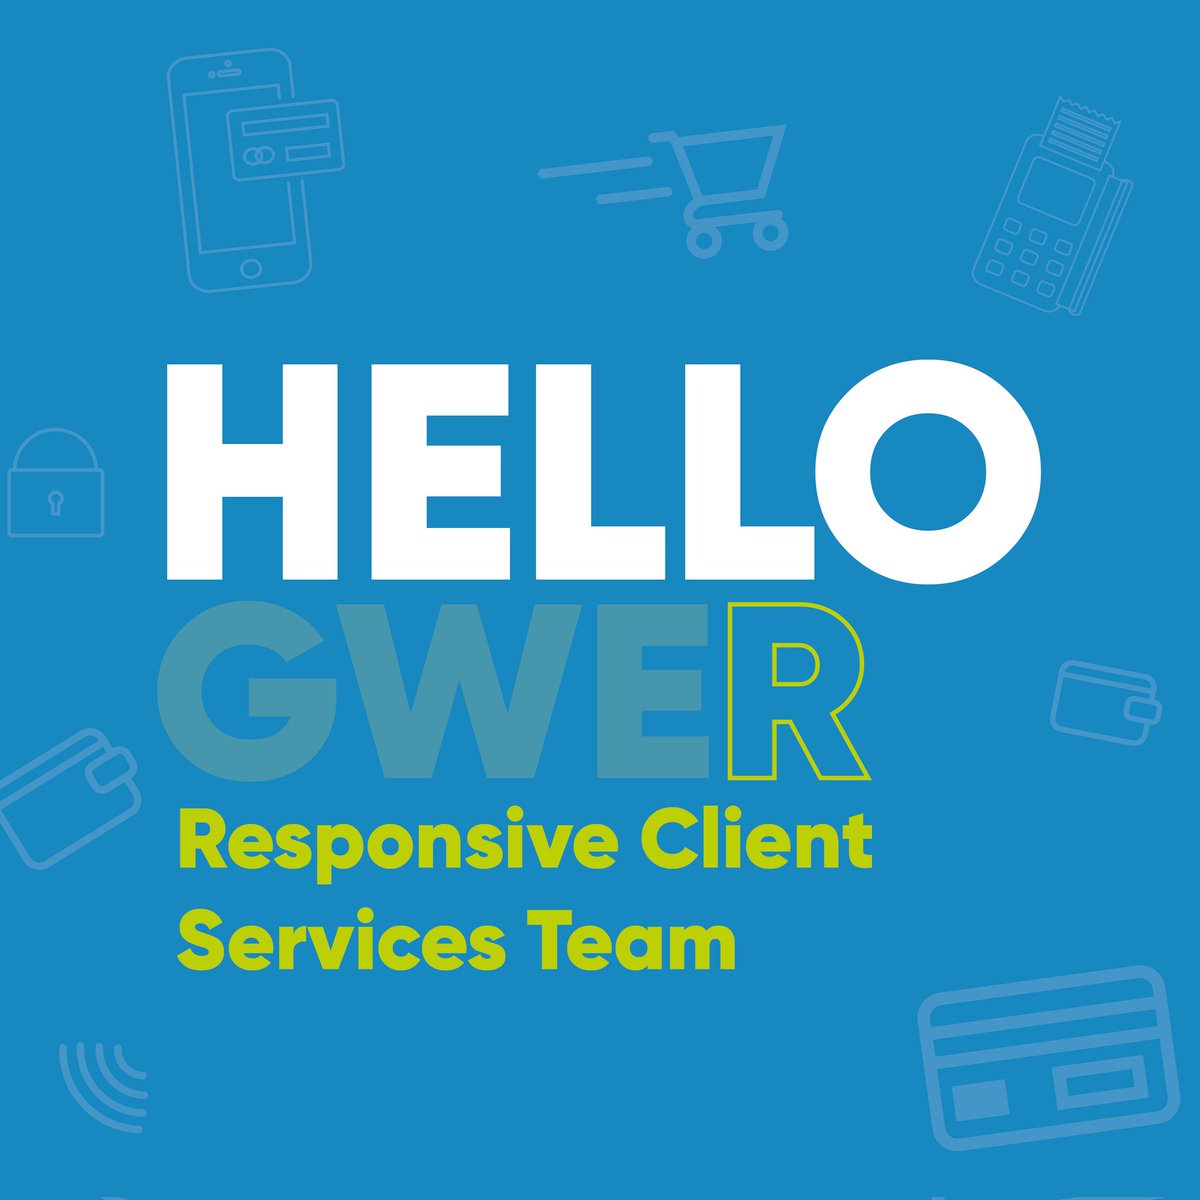 This community deserves the very best - a responsive client services team is at the ready to serve you!
#NewBranchAlert.